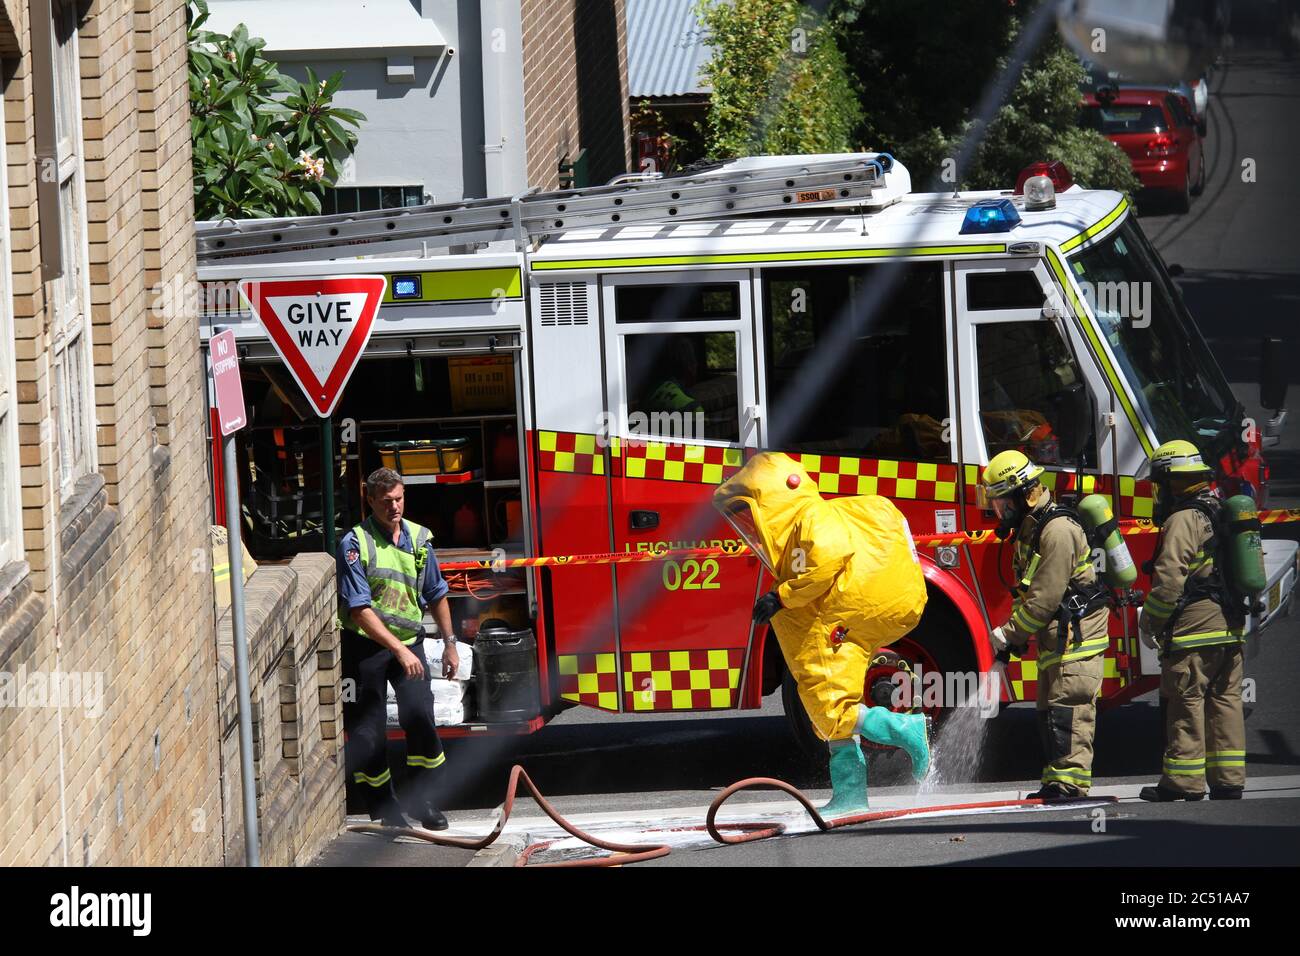 The NSW Fire Brigades workers in yellow hazardous materials protective clothing are washed clean at the Woolley Street end of St James Lane in Glebe. Stock Photo